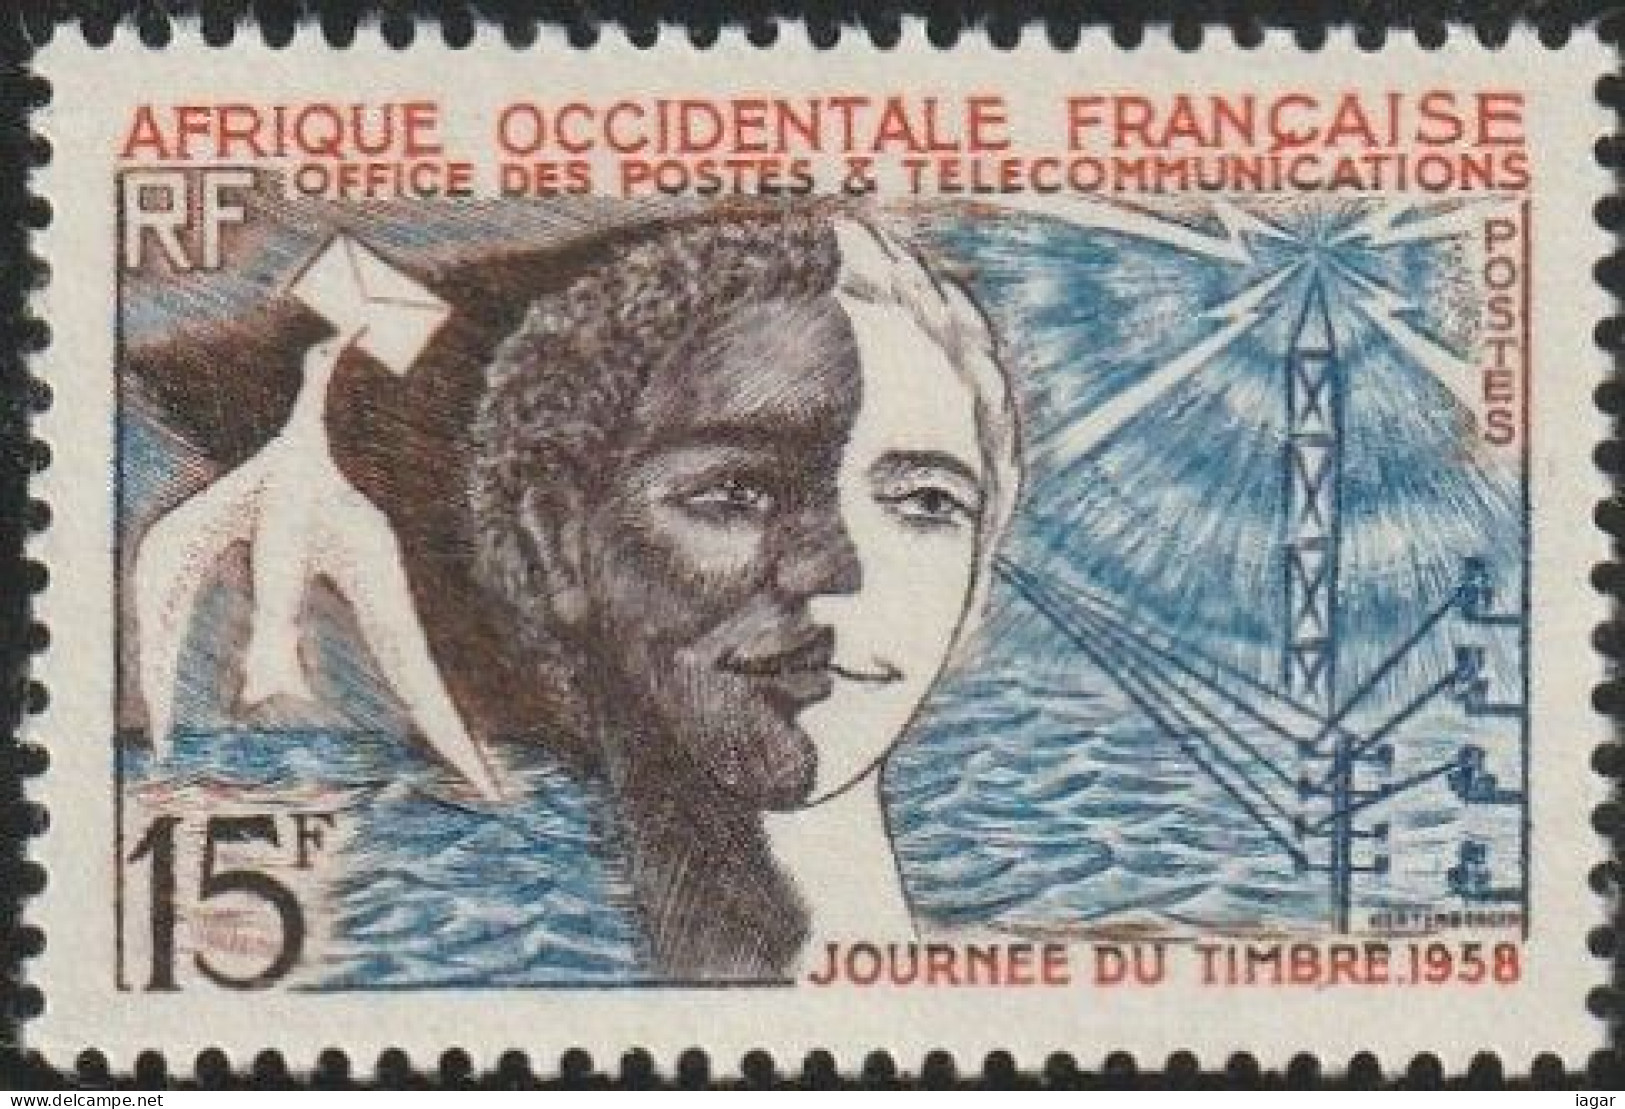 THEMATIC STAMP DAY:  ALLEGORIES AND EMBLEMS   -   AFRIQUE OCCIDENTALE  FR. - Journée Du Timbre